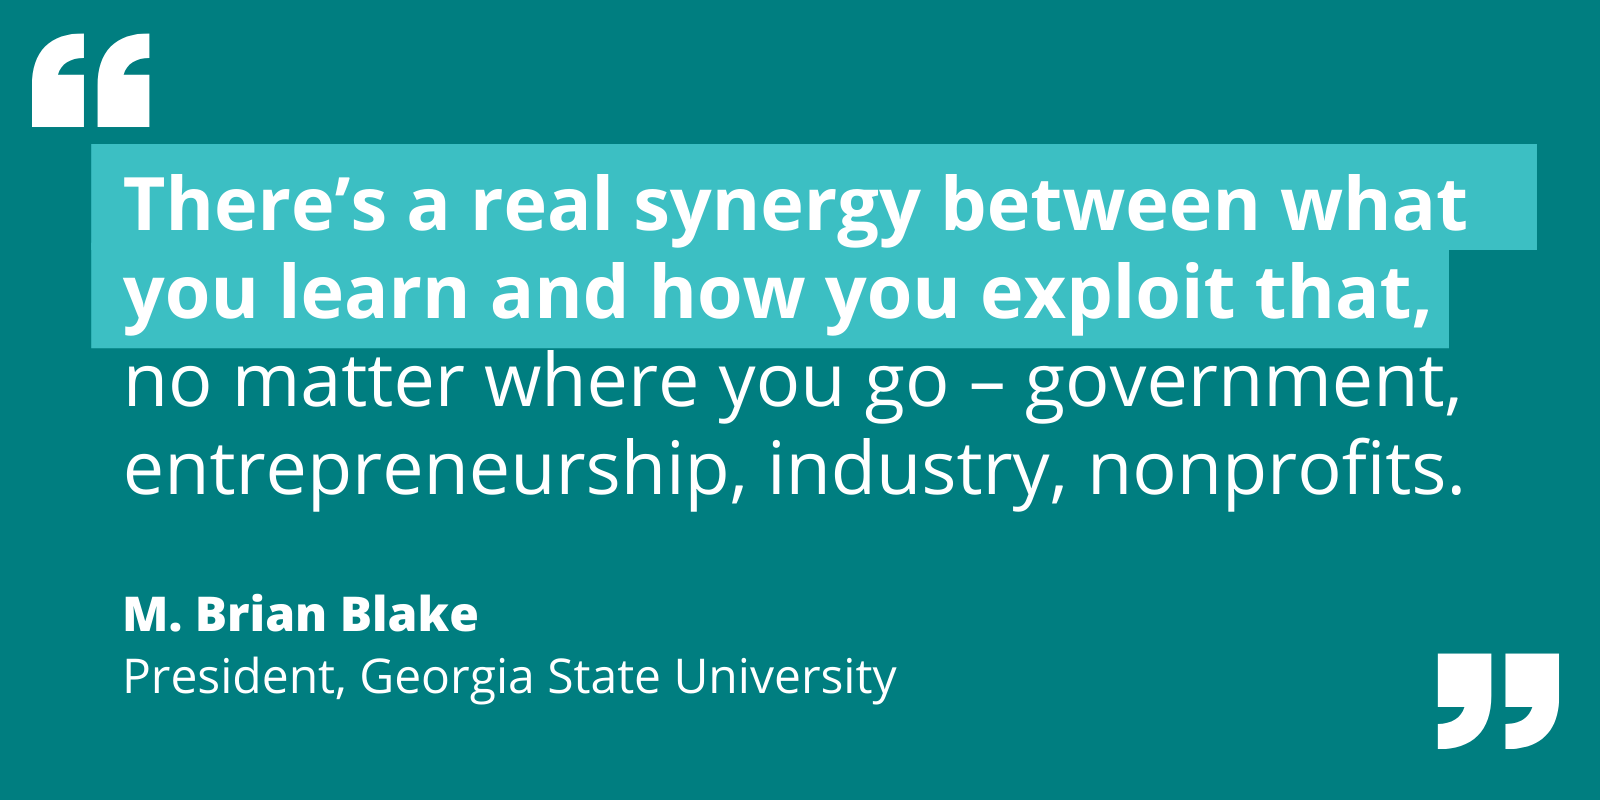 Quote by M. Brian Blake re: how the synergy between what you learn and how you use it is transferrable to any sector.